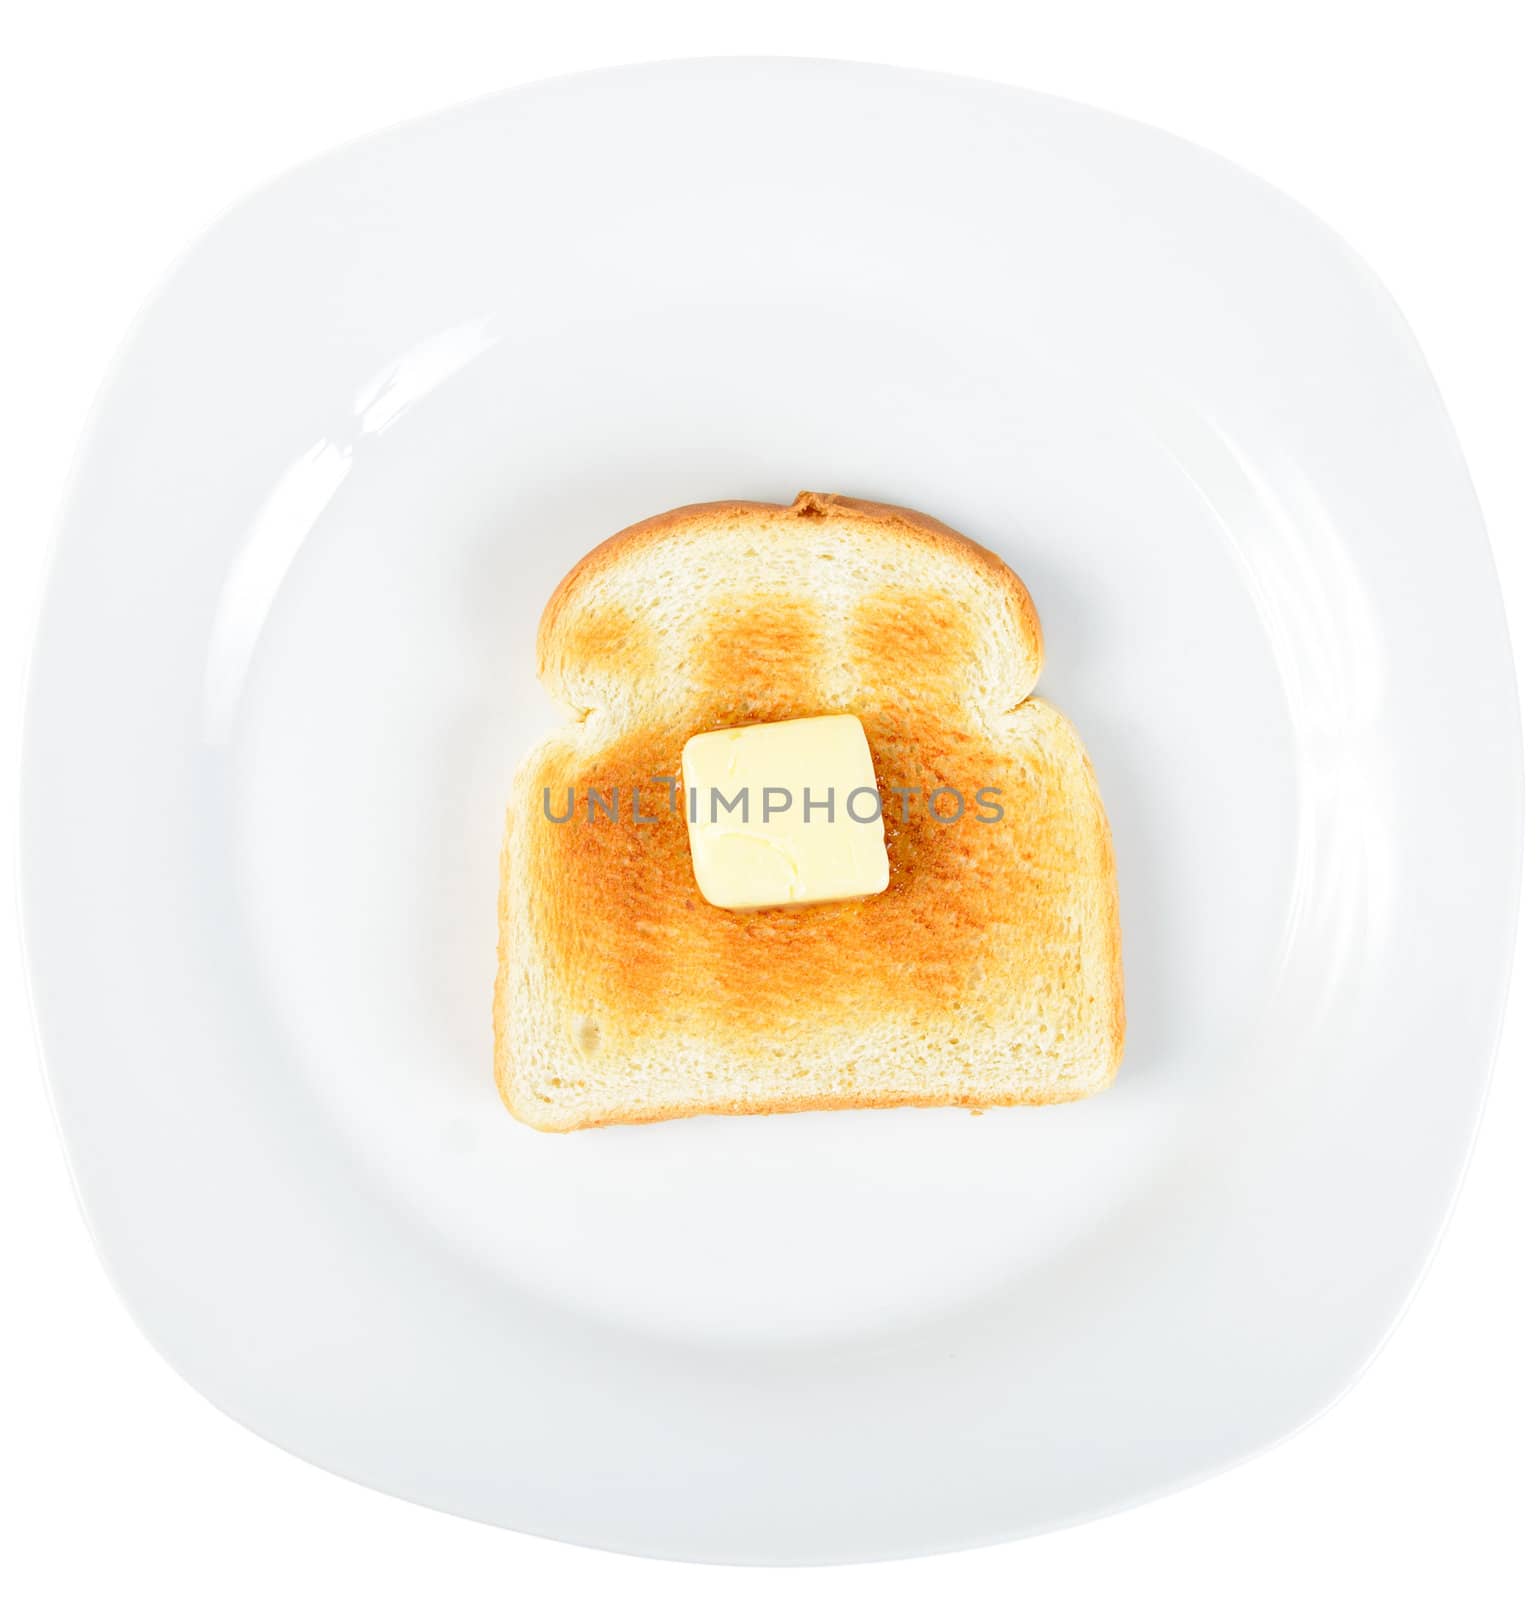 A slice of toast on a white plate with a square of butter slowly melting on top.